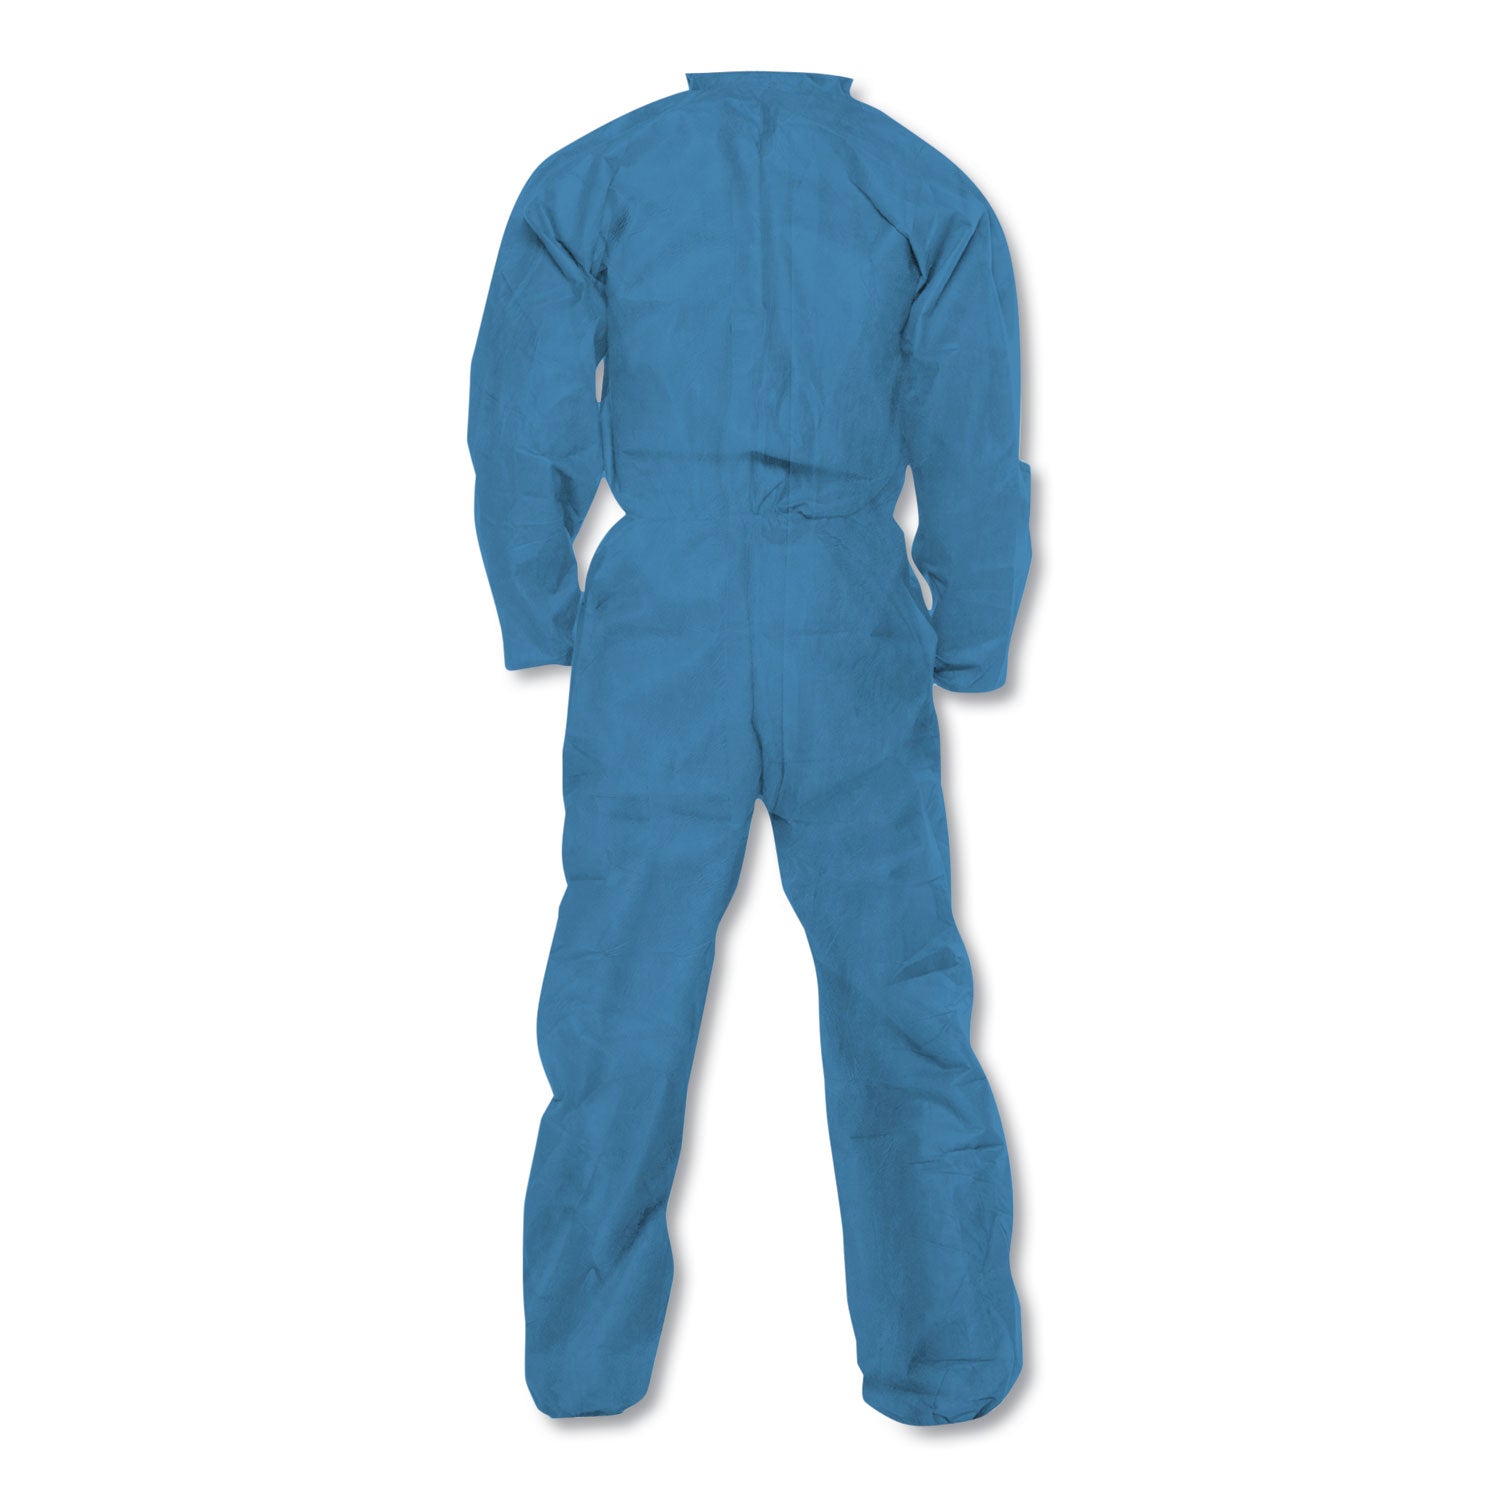 a20-breathable-particle-protection-coveralls-large-blue-24-carton_kcc58533 - 6